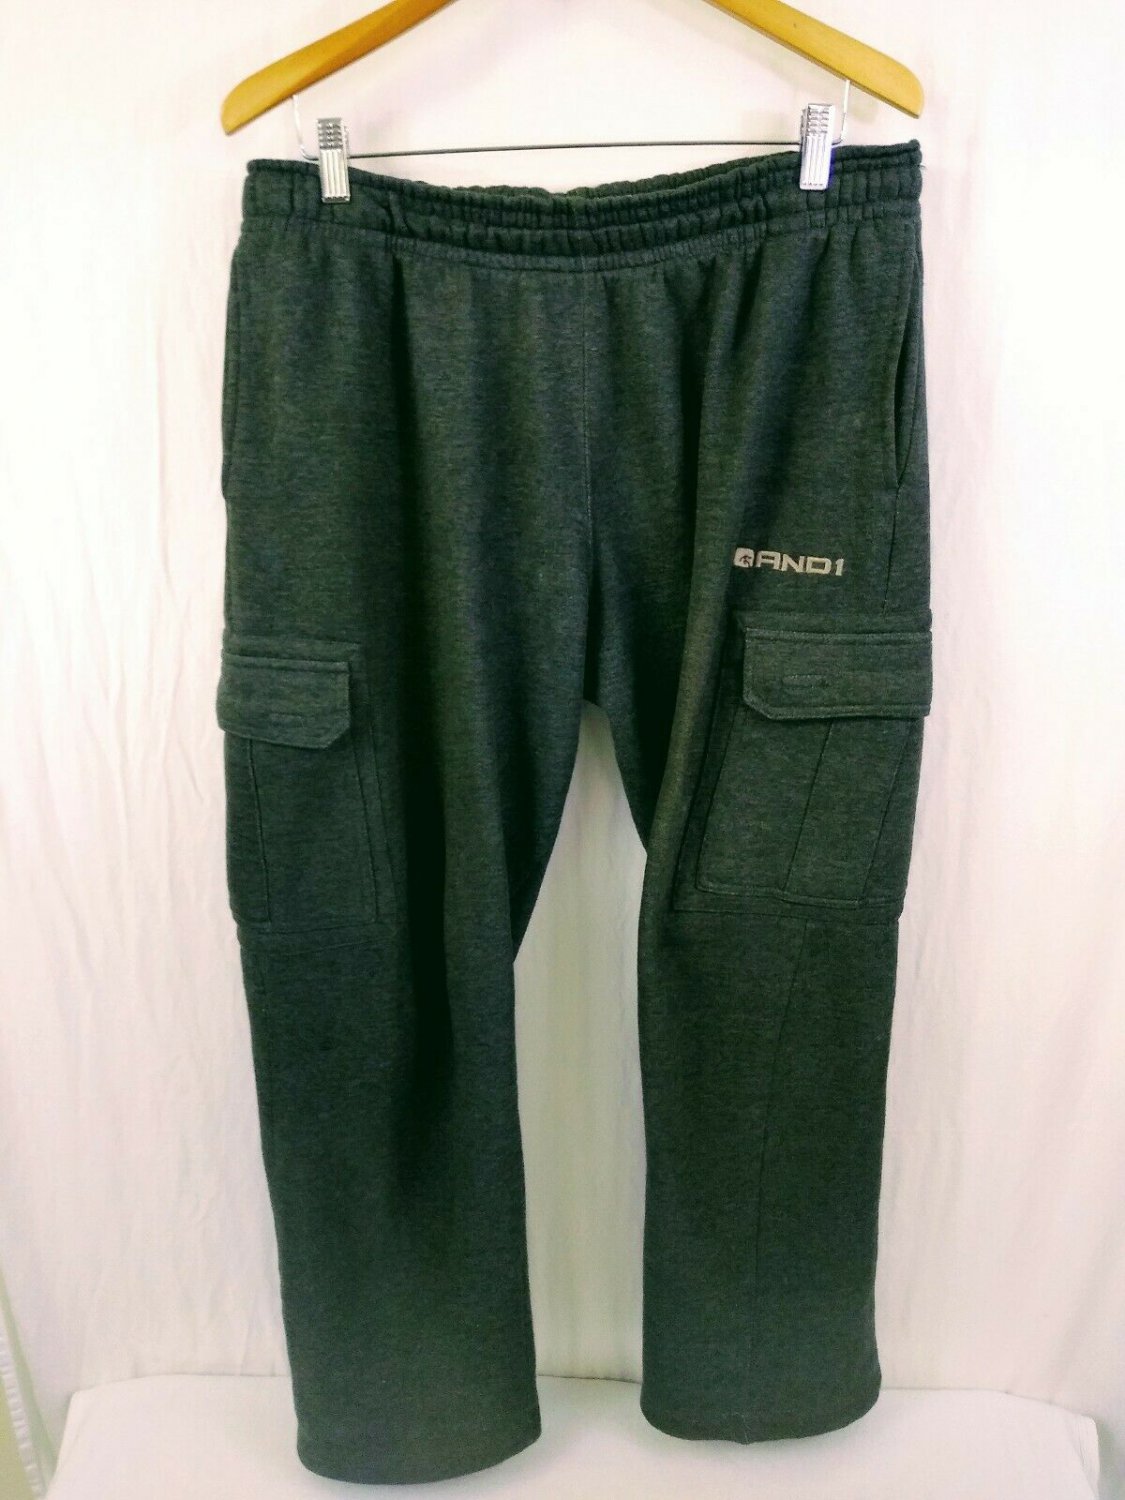 AND 1 Gray Cotton/Polyester Mens Athletic Cargo Pants Size Large